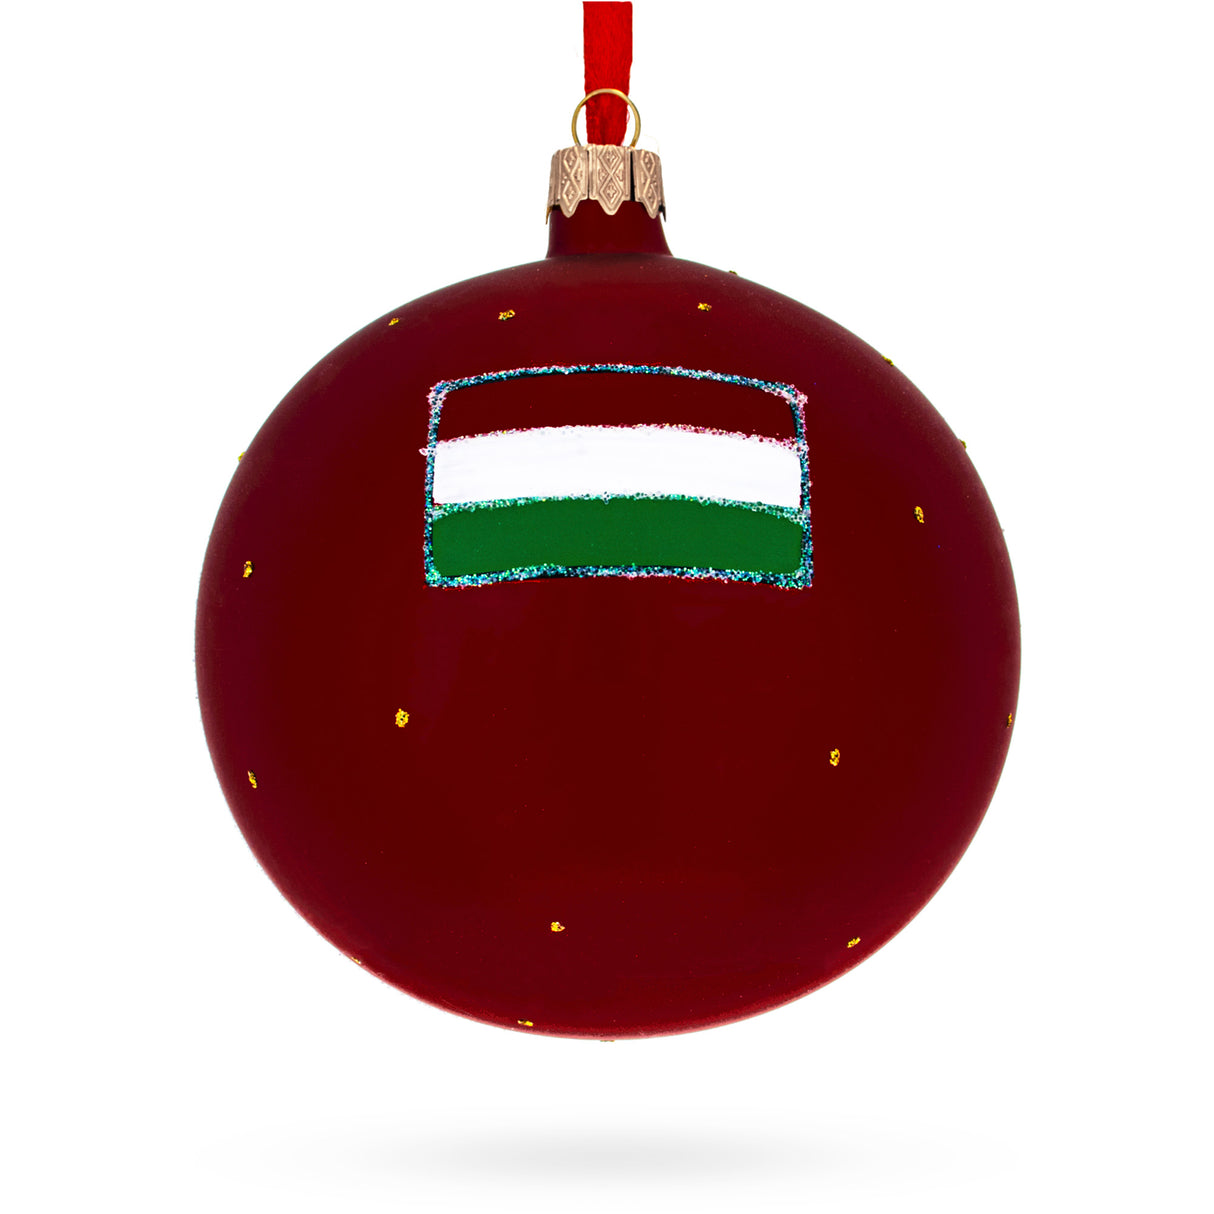 Buy Christmas Ornaments Travel Europe Hungary by BestPysanky Online Gift Ship